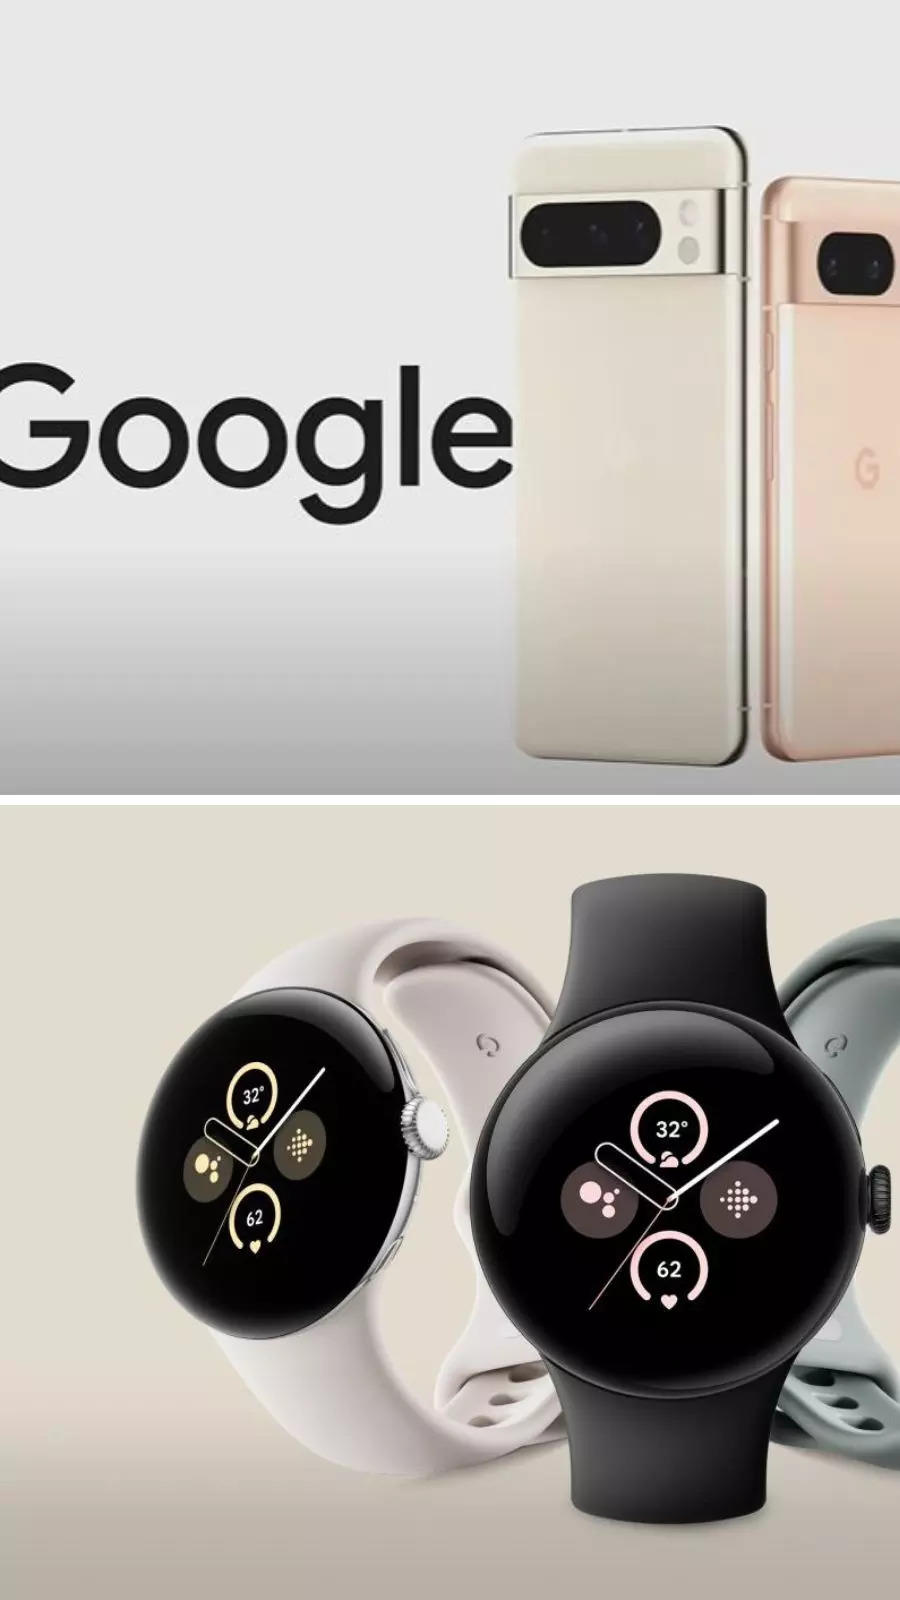 Google Pixel Watch 2 launched in India with new sensors, better